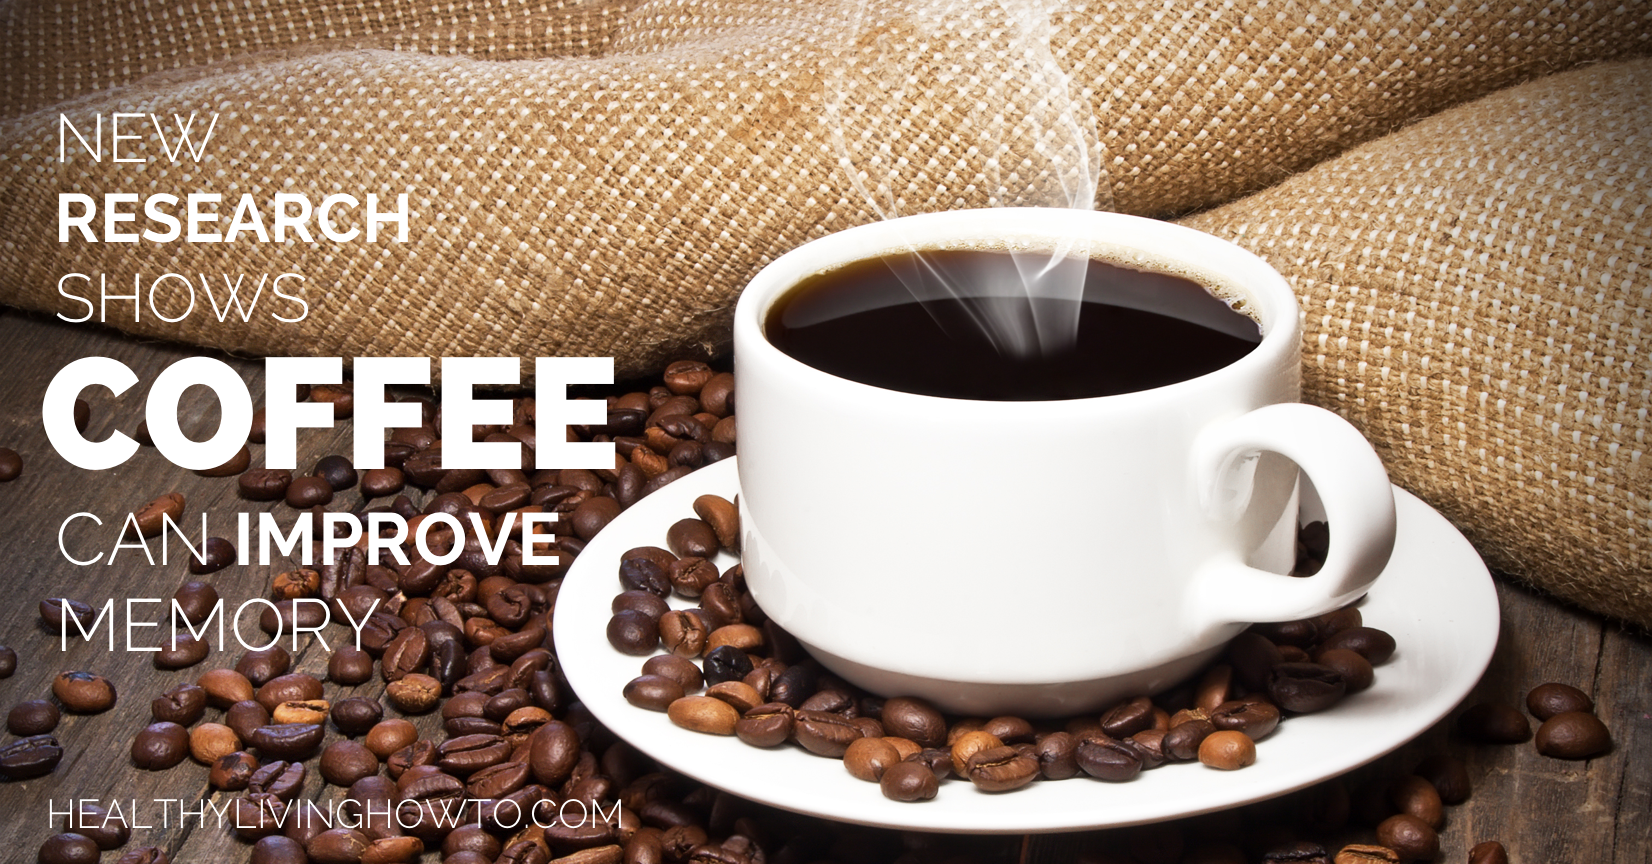 Can Coffee Really Improve Memory? | healthylivinghowto.com